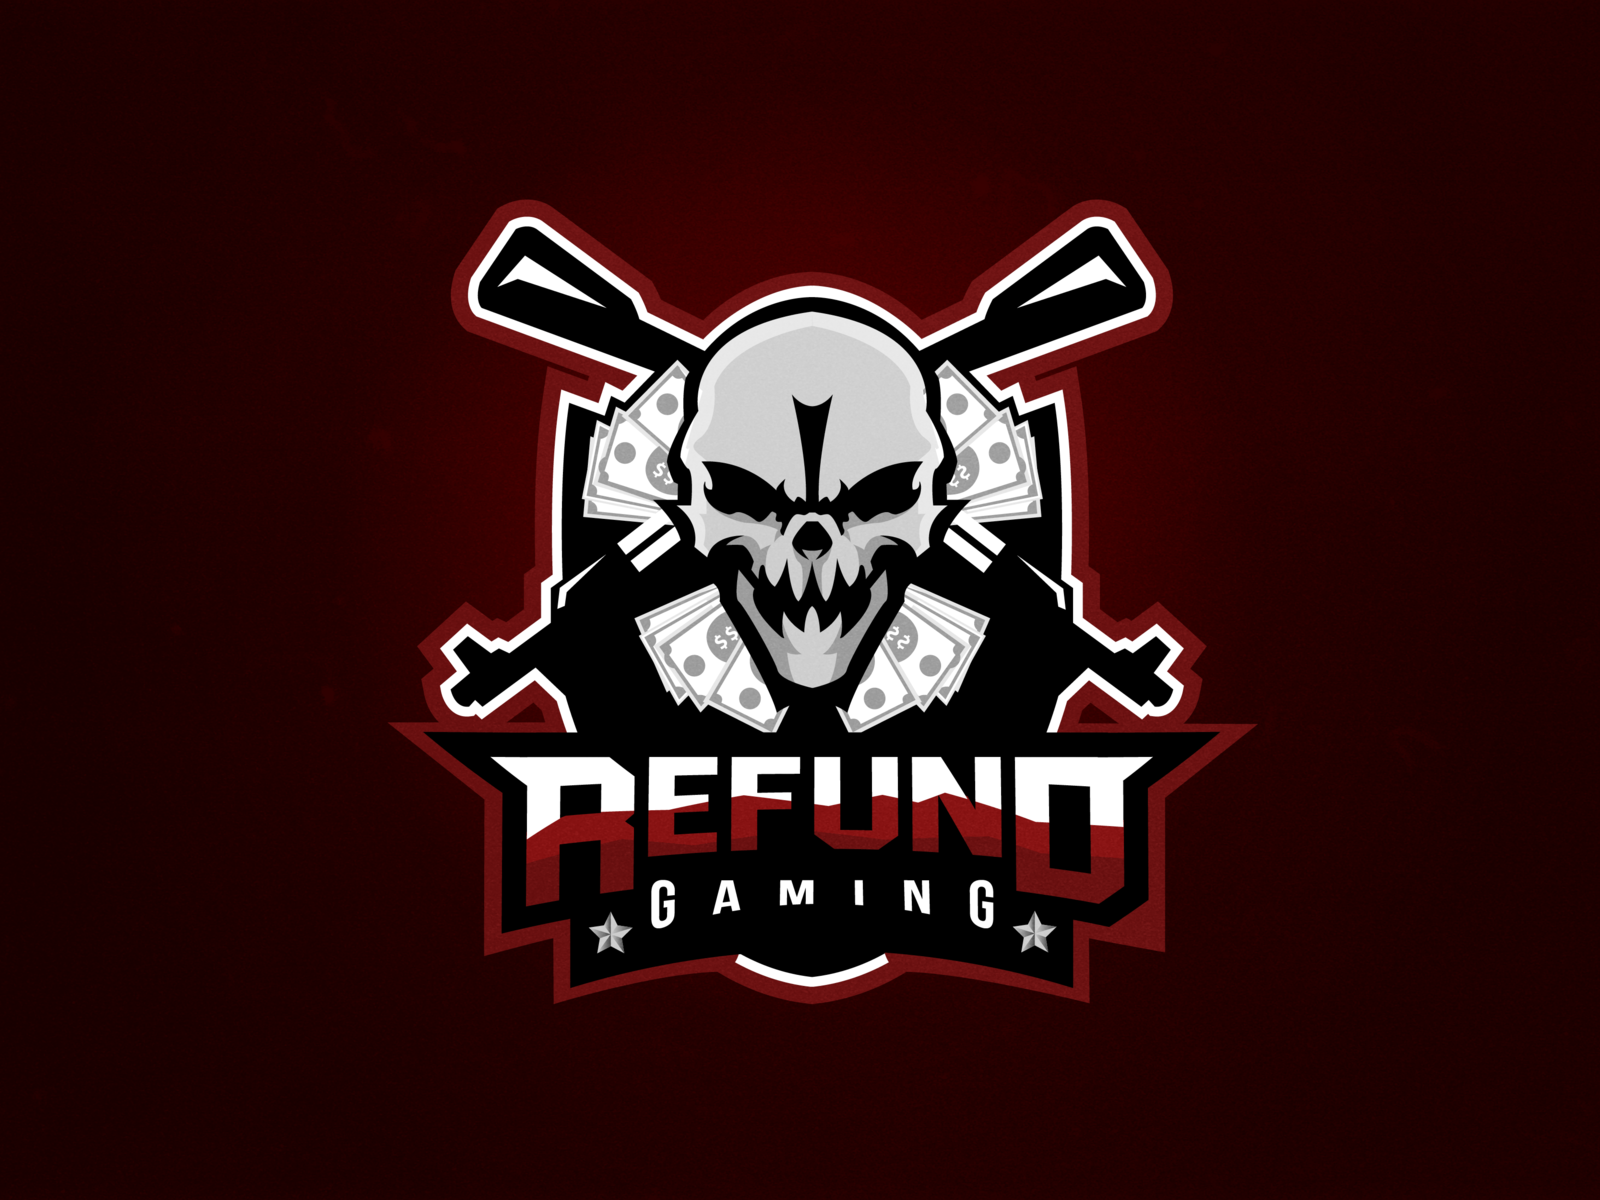 Refund Gaming team logo. by Lou An Phạm on Dribbble